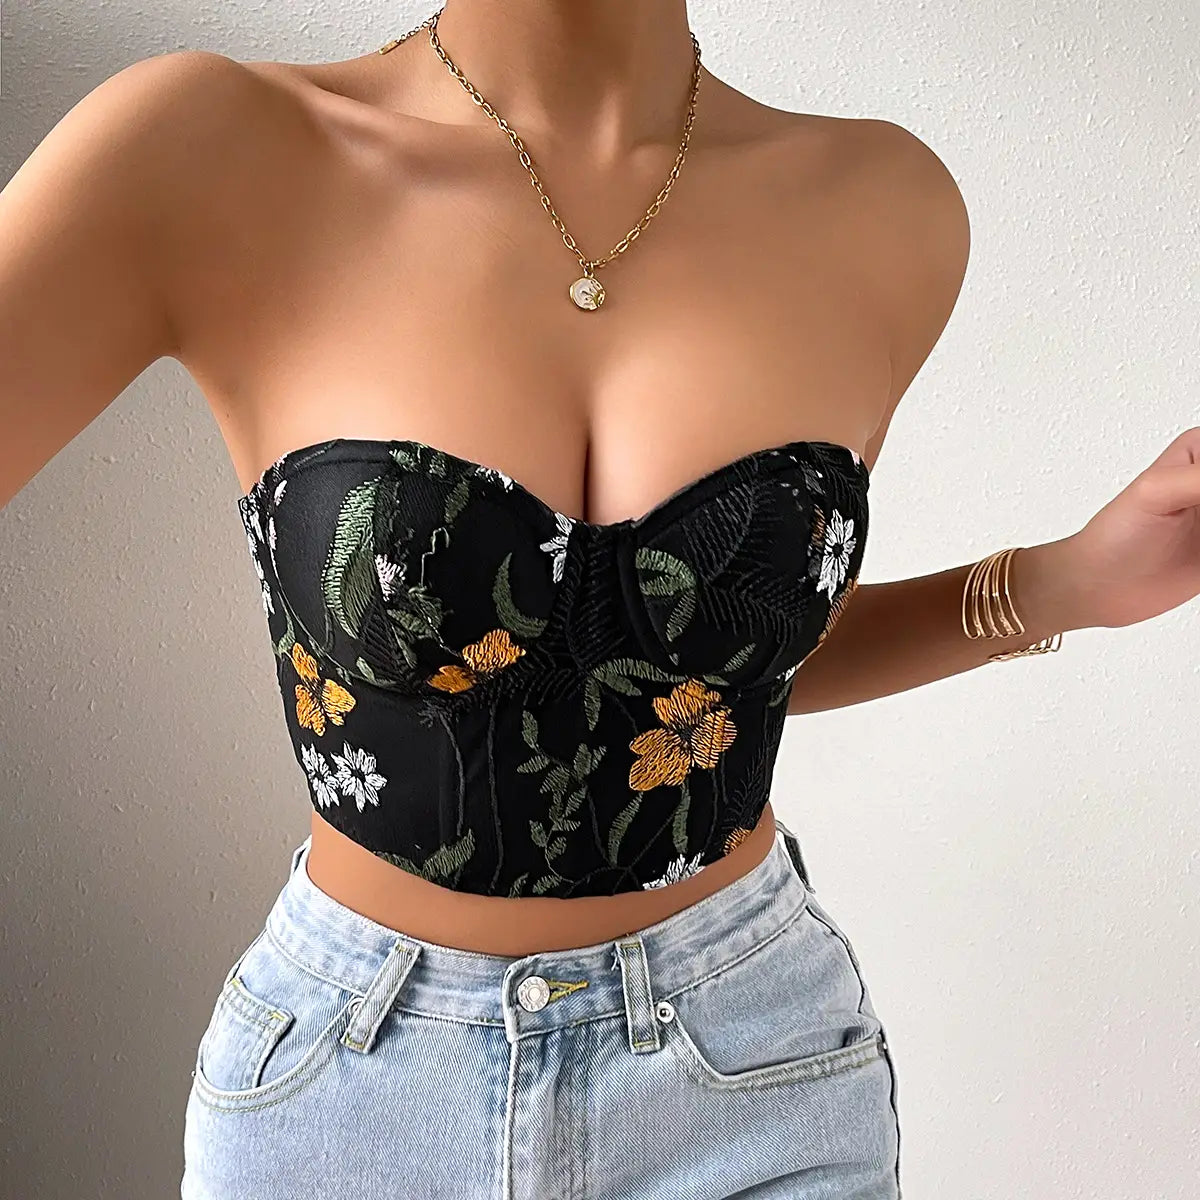 Sexy Embroidered Tube Top - Allure Amplified For Sultry Summer Nights